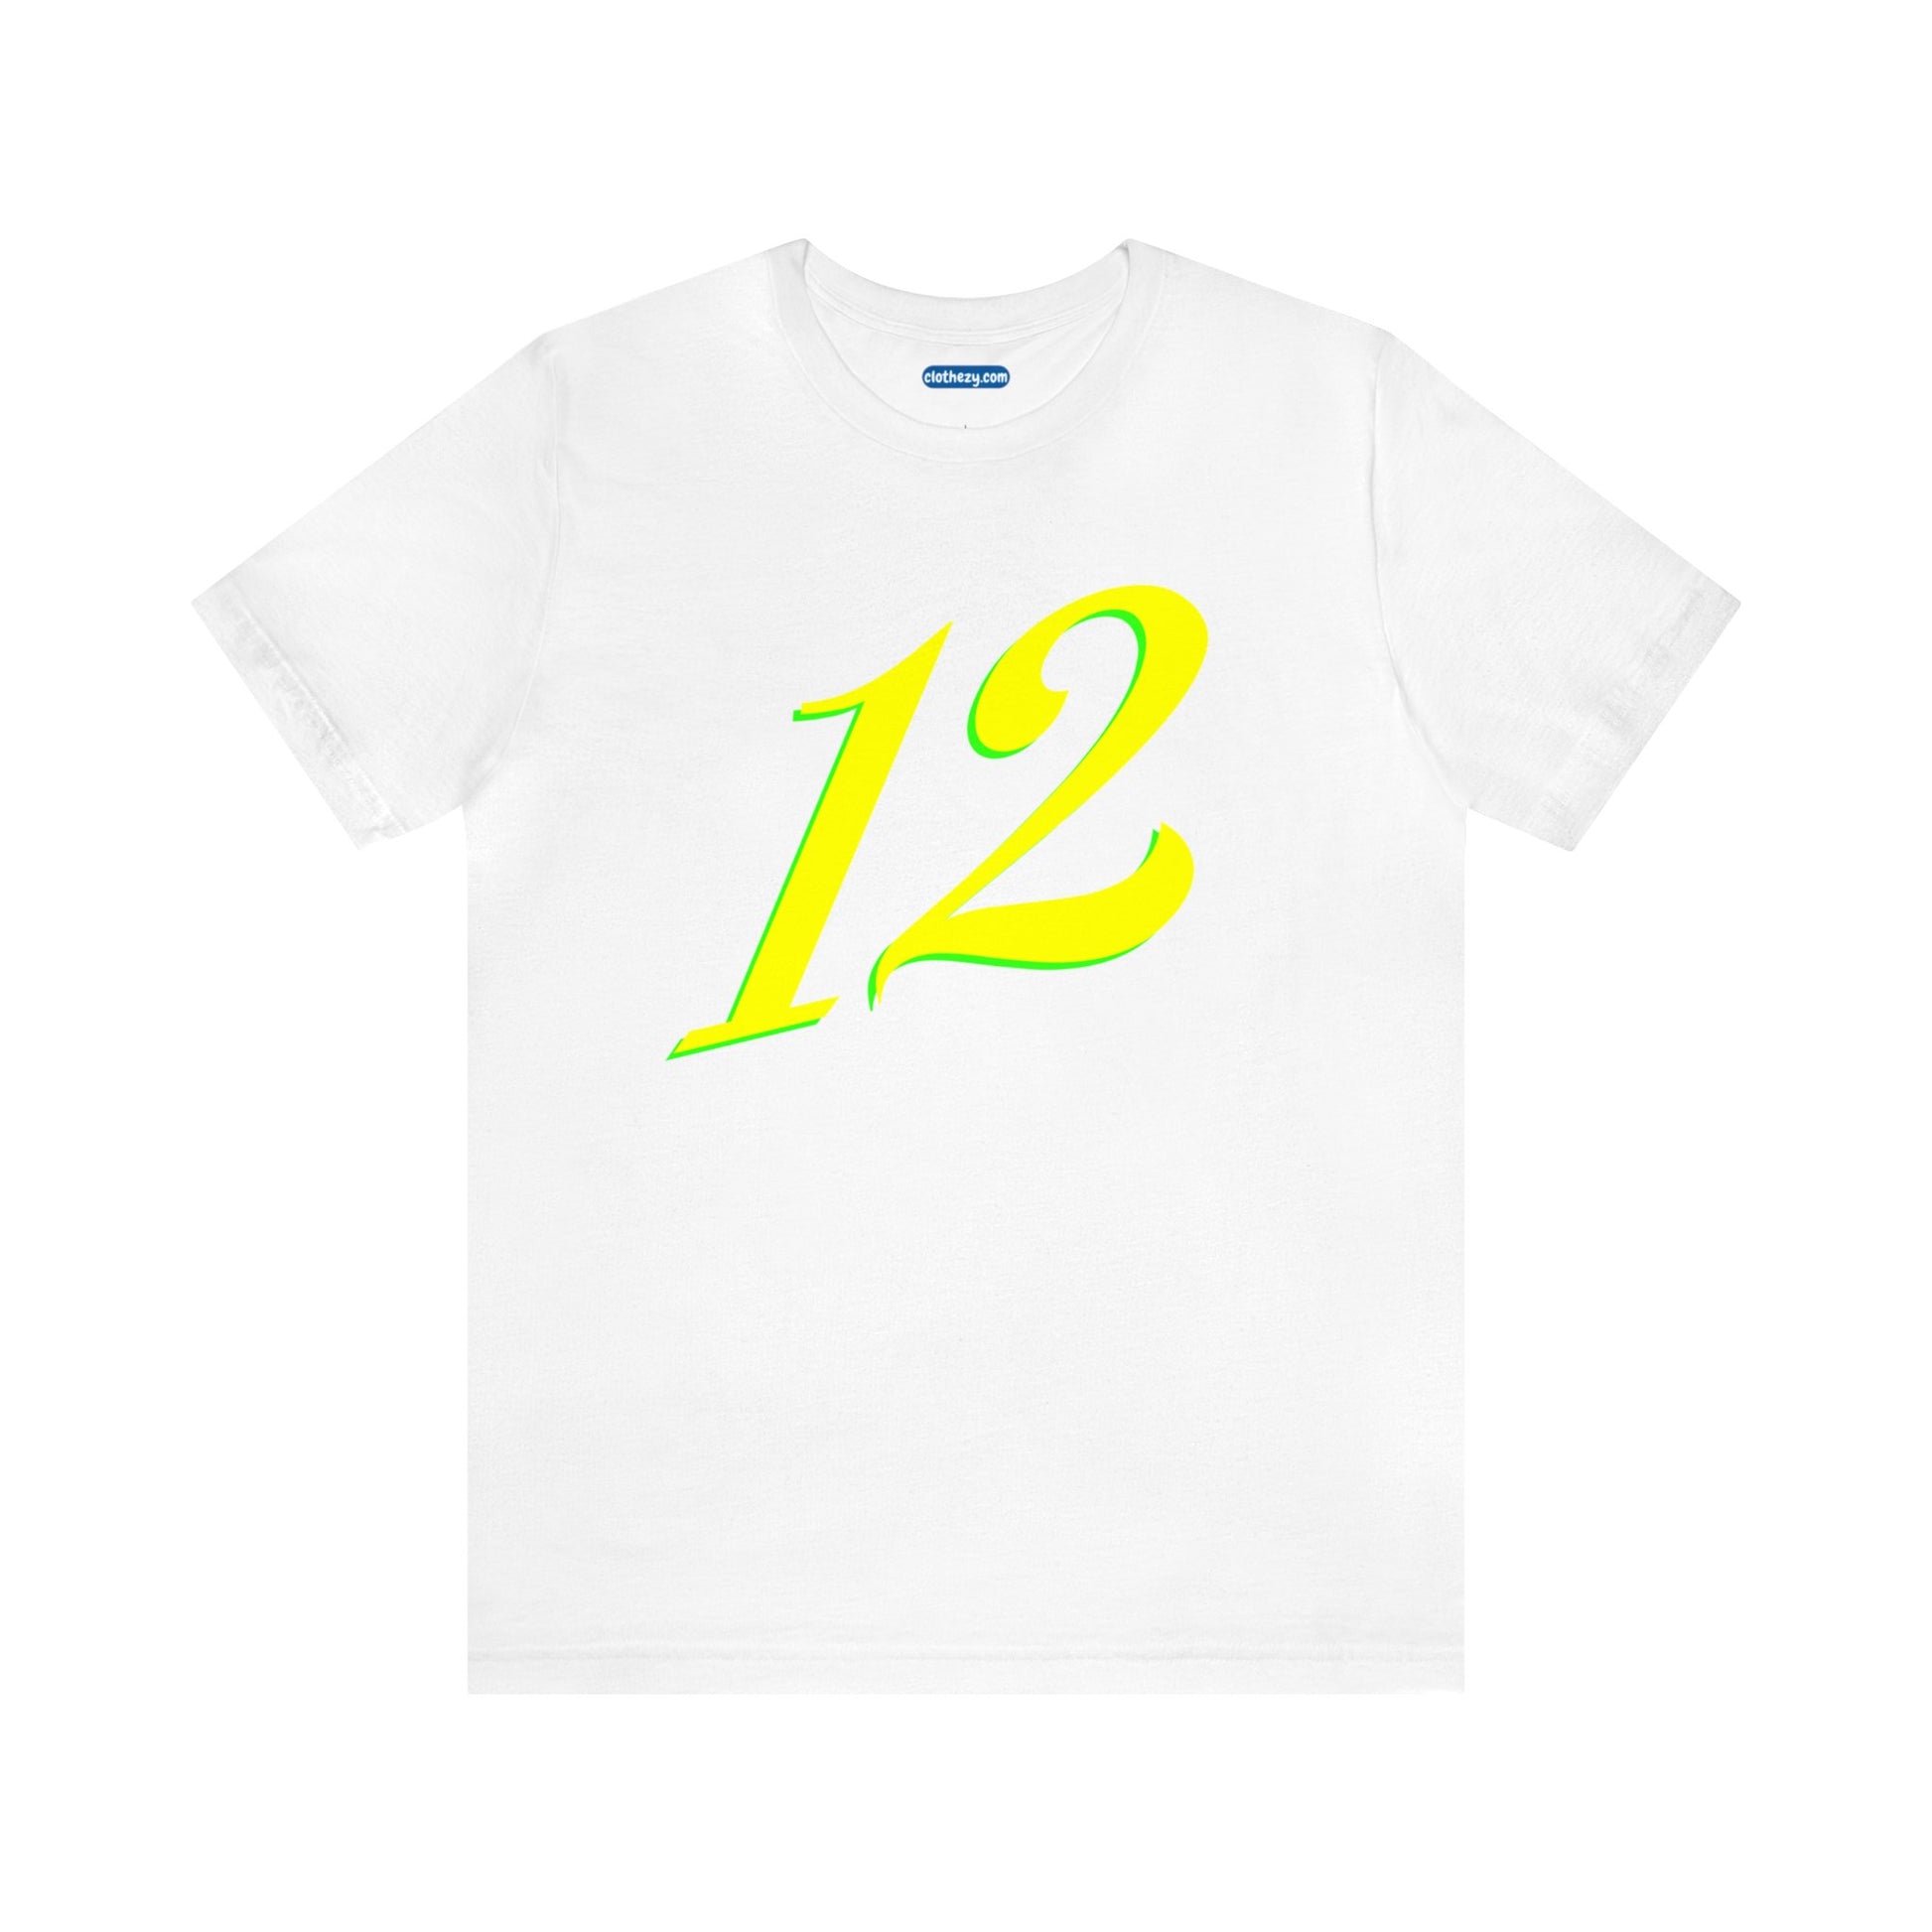 Number 12 Design - Soft Cotton Tee for birthdays and celebrations, Gift for friends and family, Multiple Options by clothezy.com in White Size Small - Buy Now